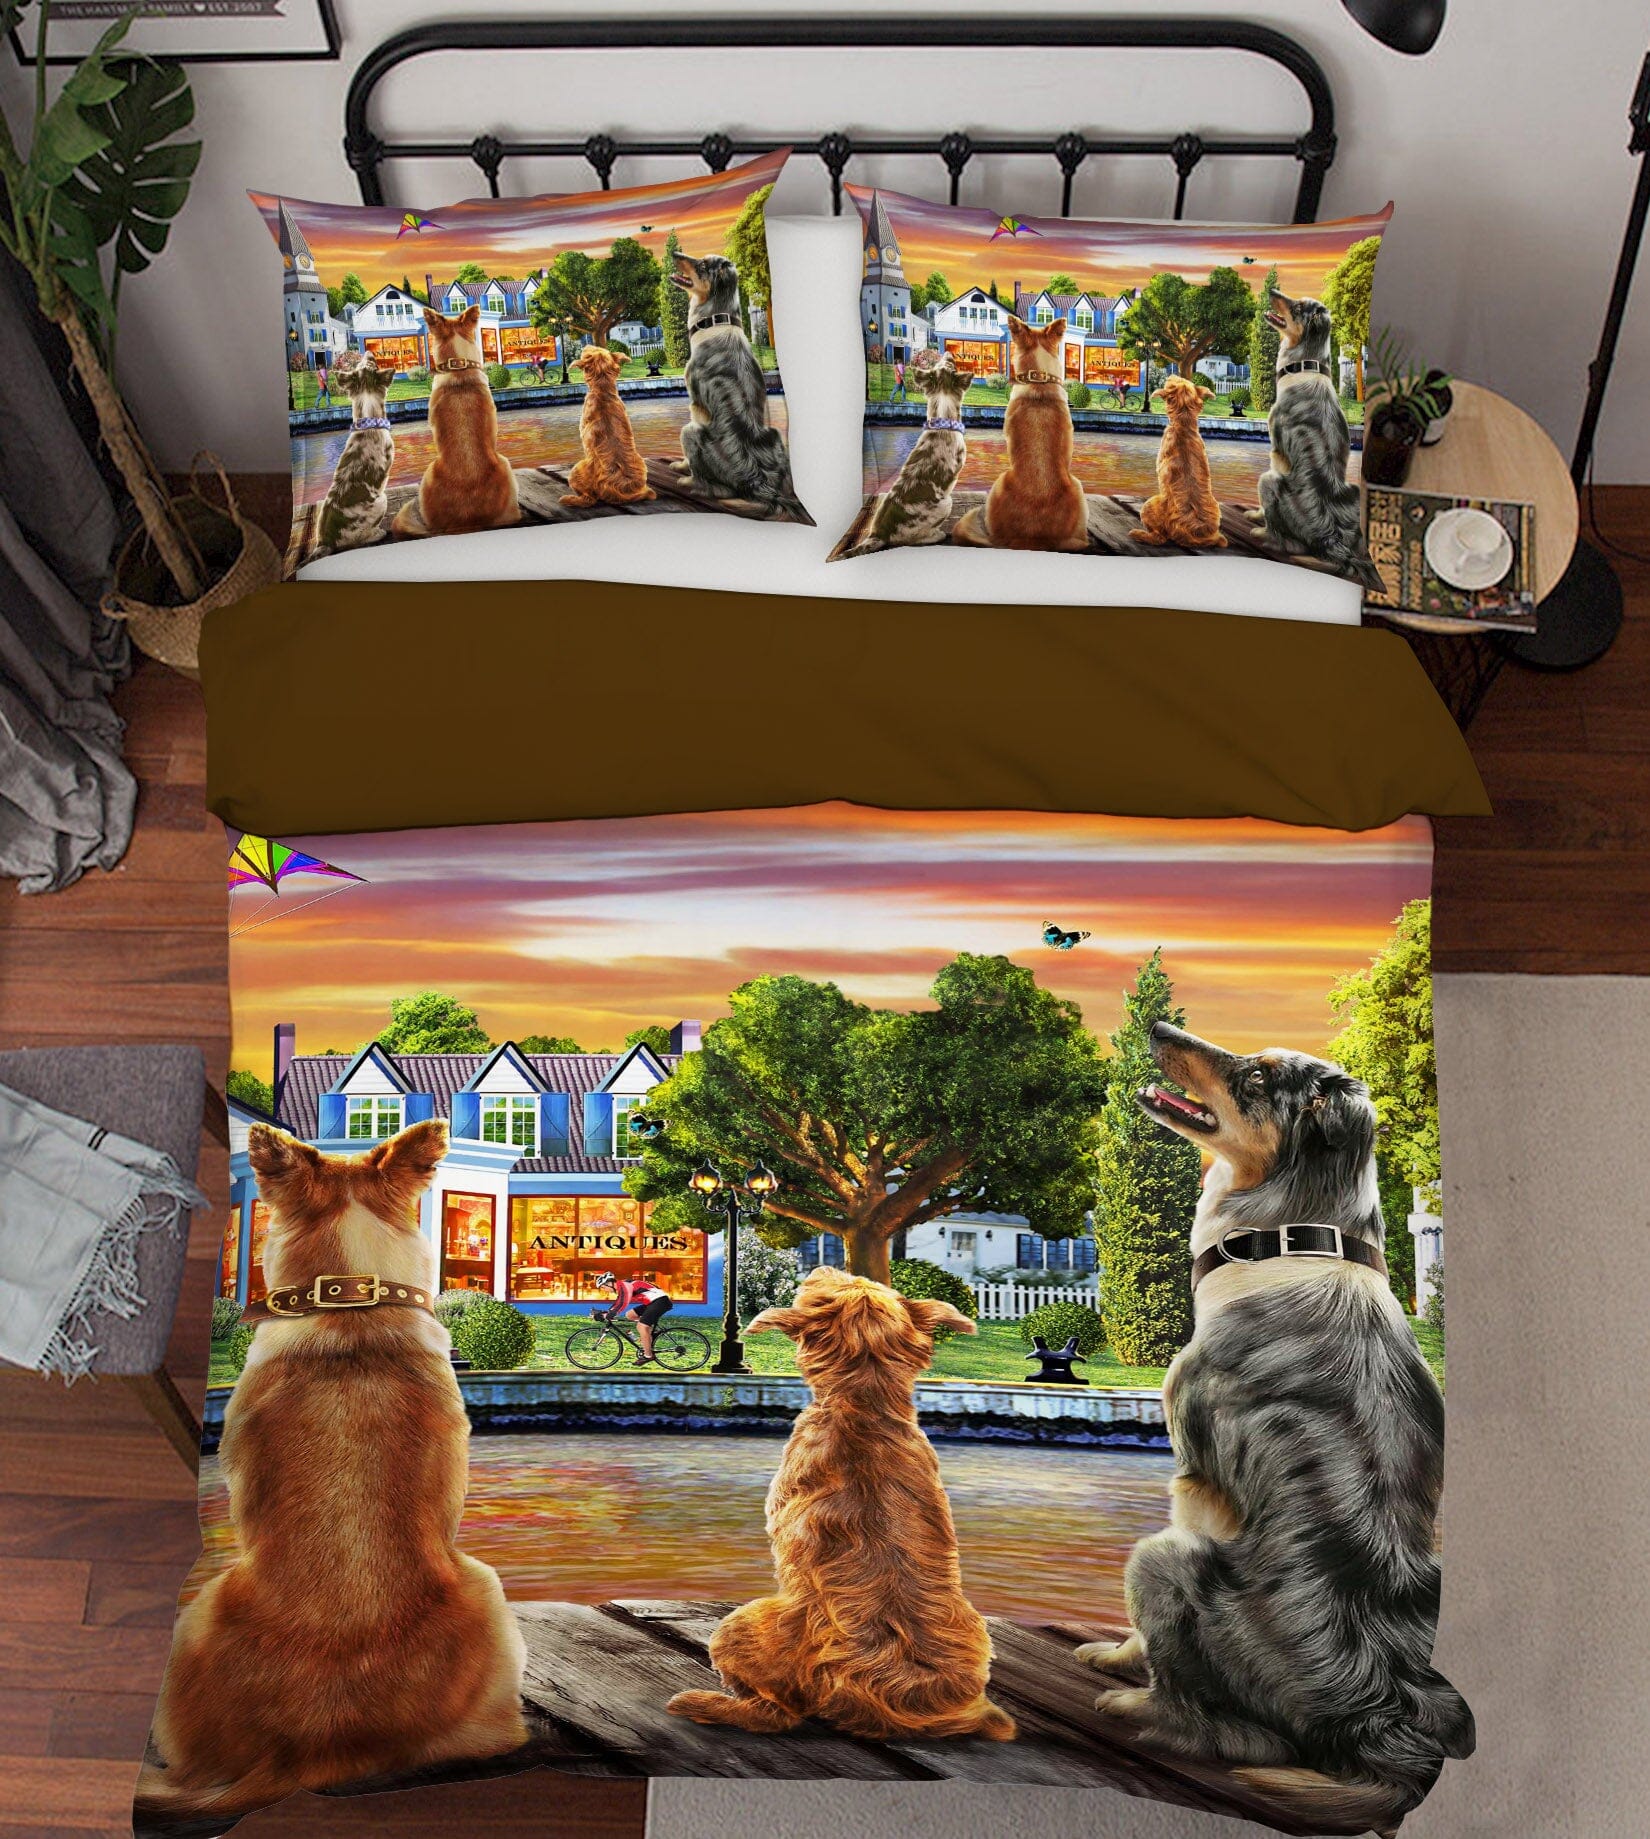 3D Watchdog 2128 Adrian Chesterman Bedding Bed Pillowcases Quilt Quiet Covers AJ Creativity Home 